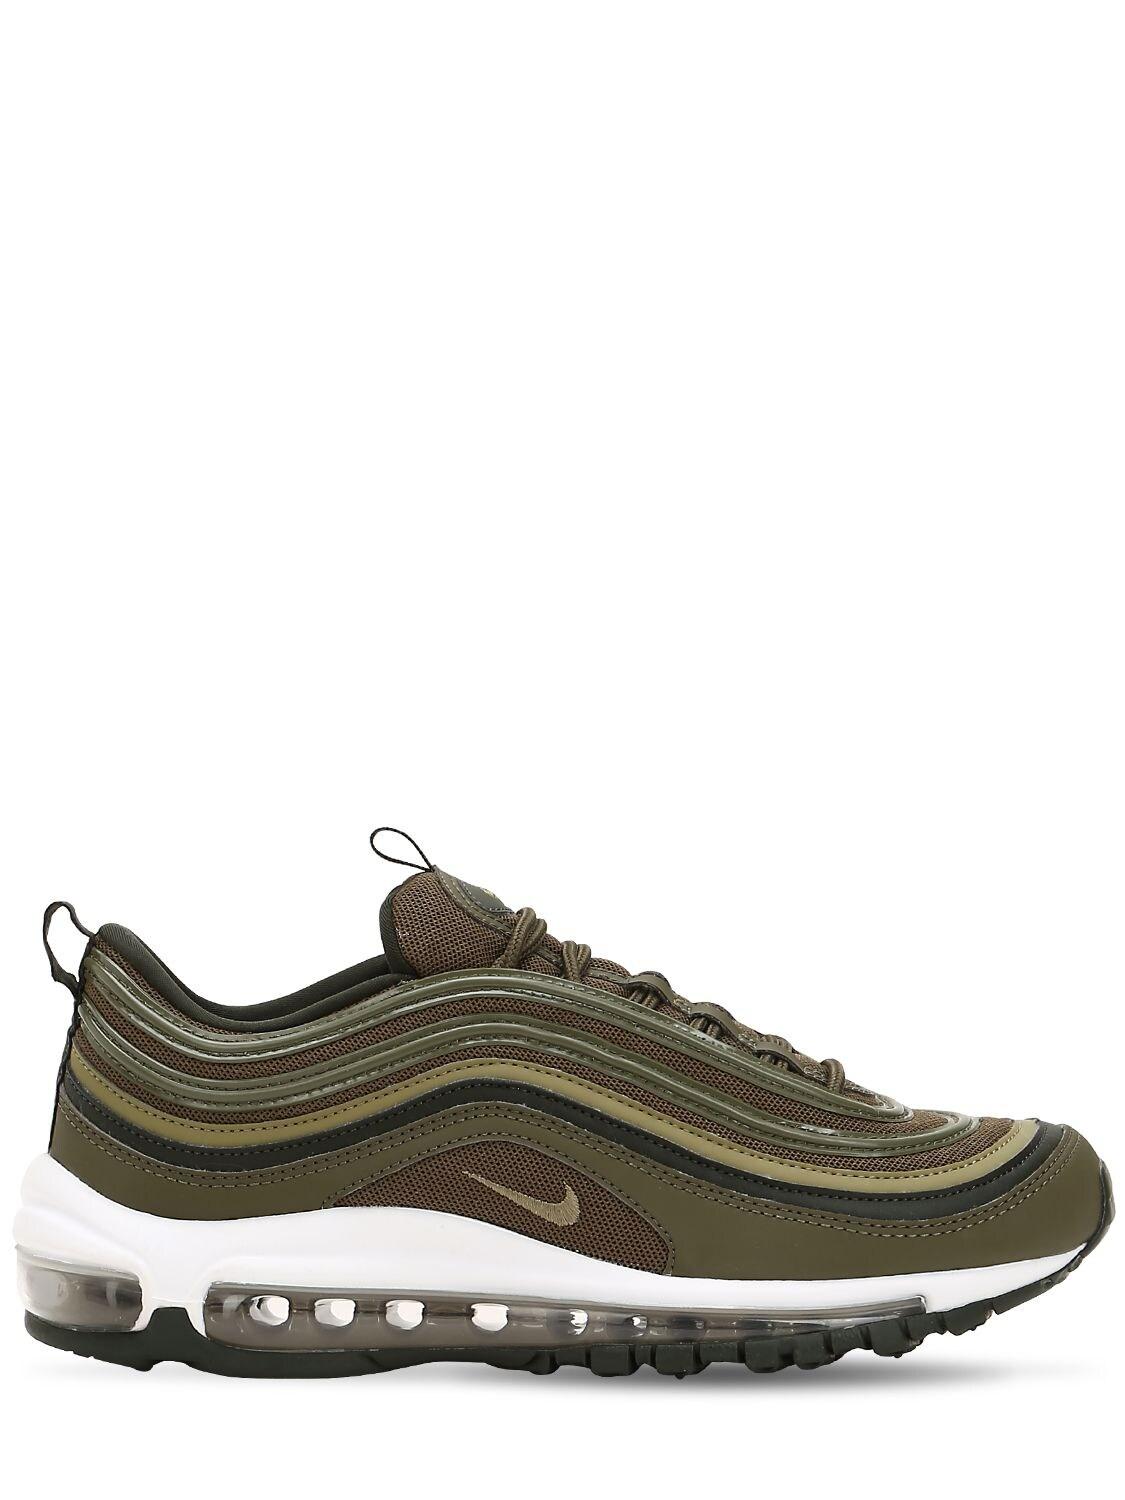 Nike Air Max 97 Sneakers in Olive Green (Green) | Lyst